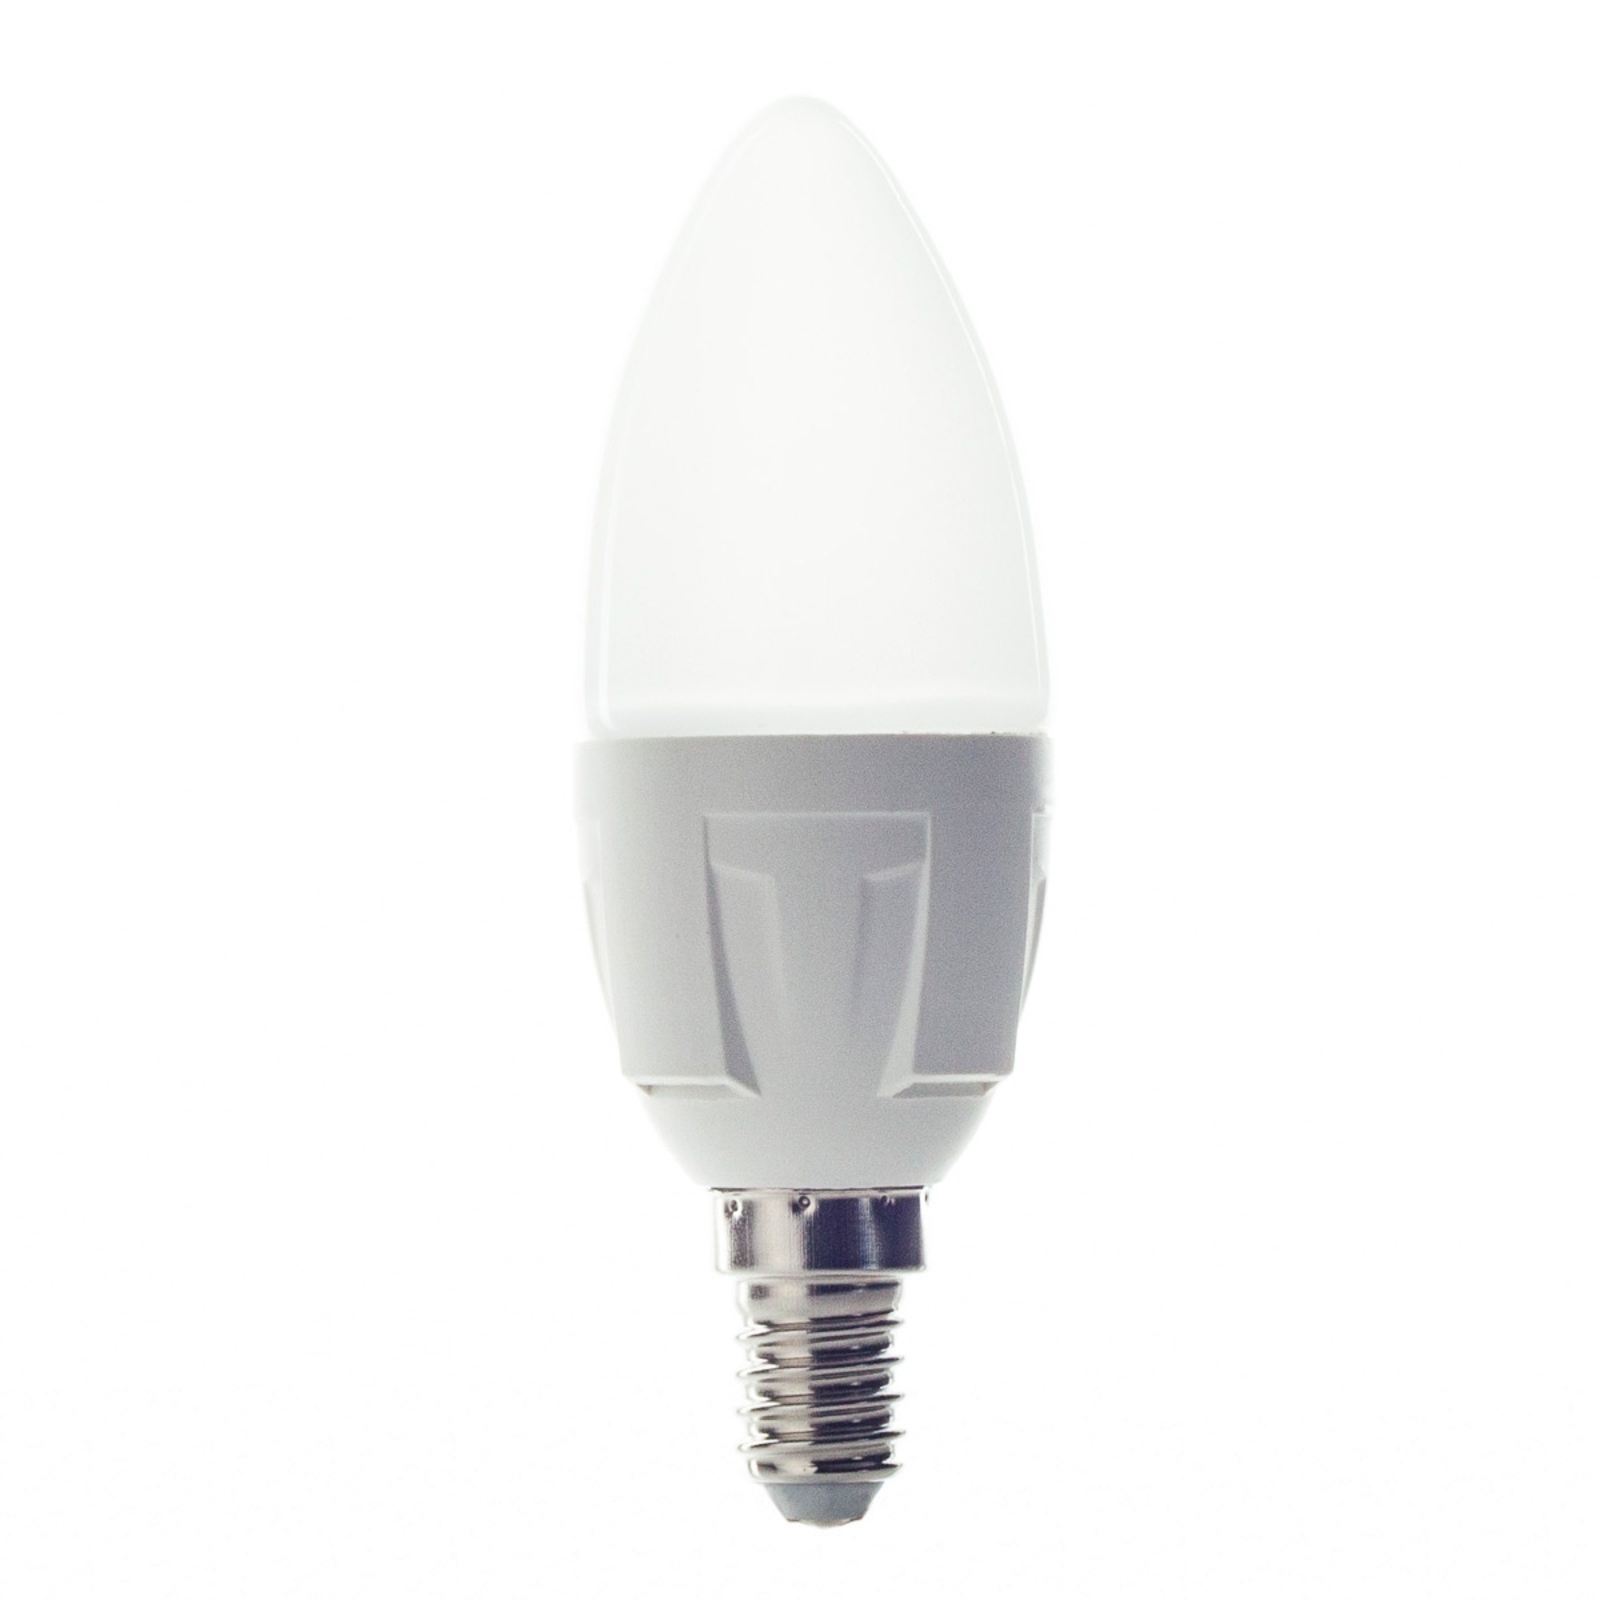 Paleis Anemoon vis Afstoting E14 4,9W 830 LED lamp in kaarsvorm warmwit | Lampen24.be